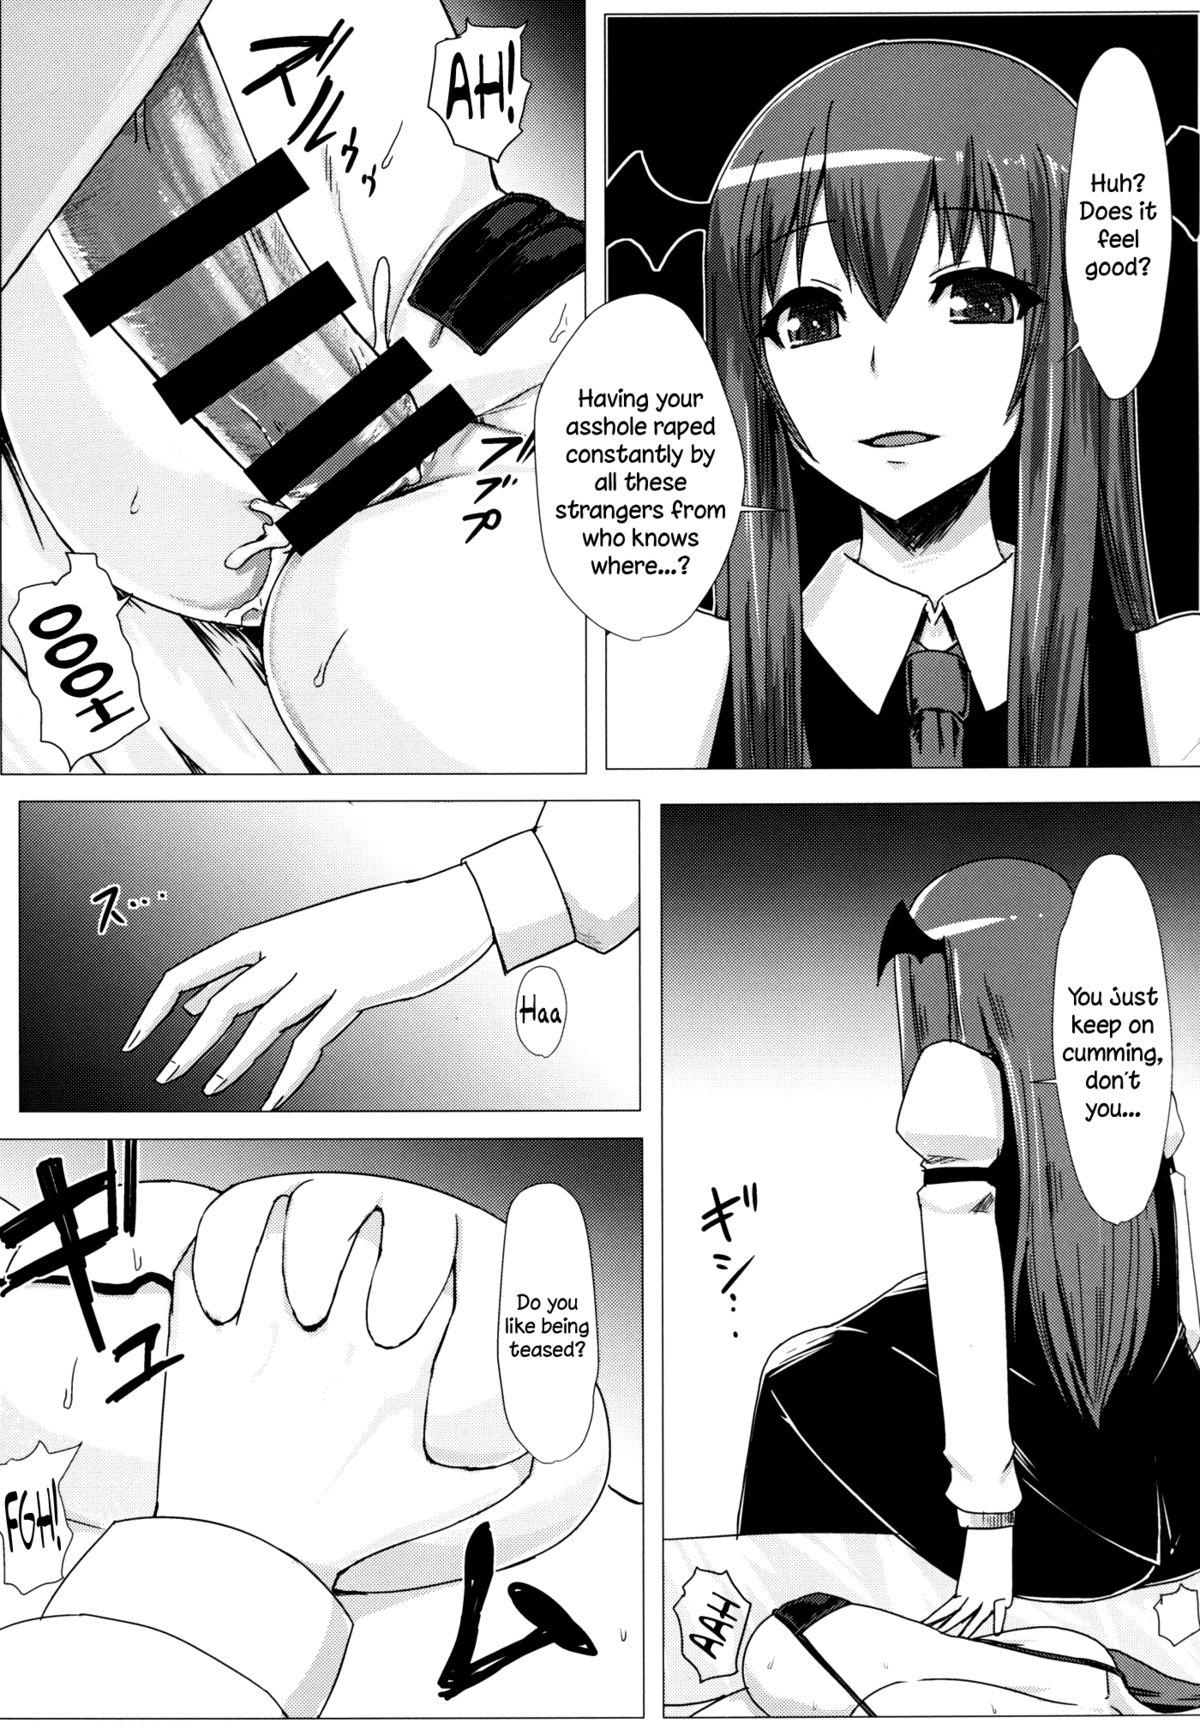 Spy Camera Shiri Pache Pache | Ass Patchy Patchy - Touhou project Tight Pussy Fuck - Page 6